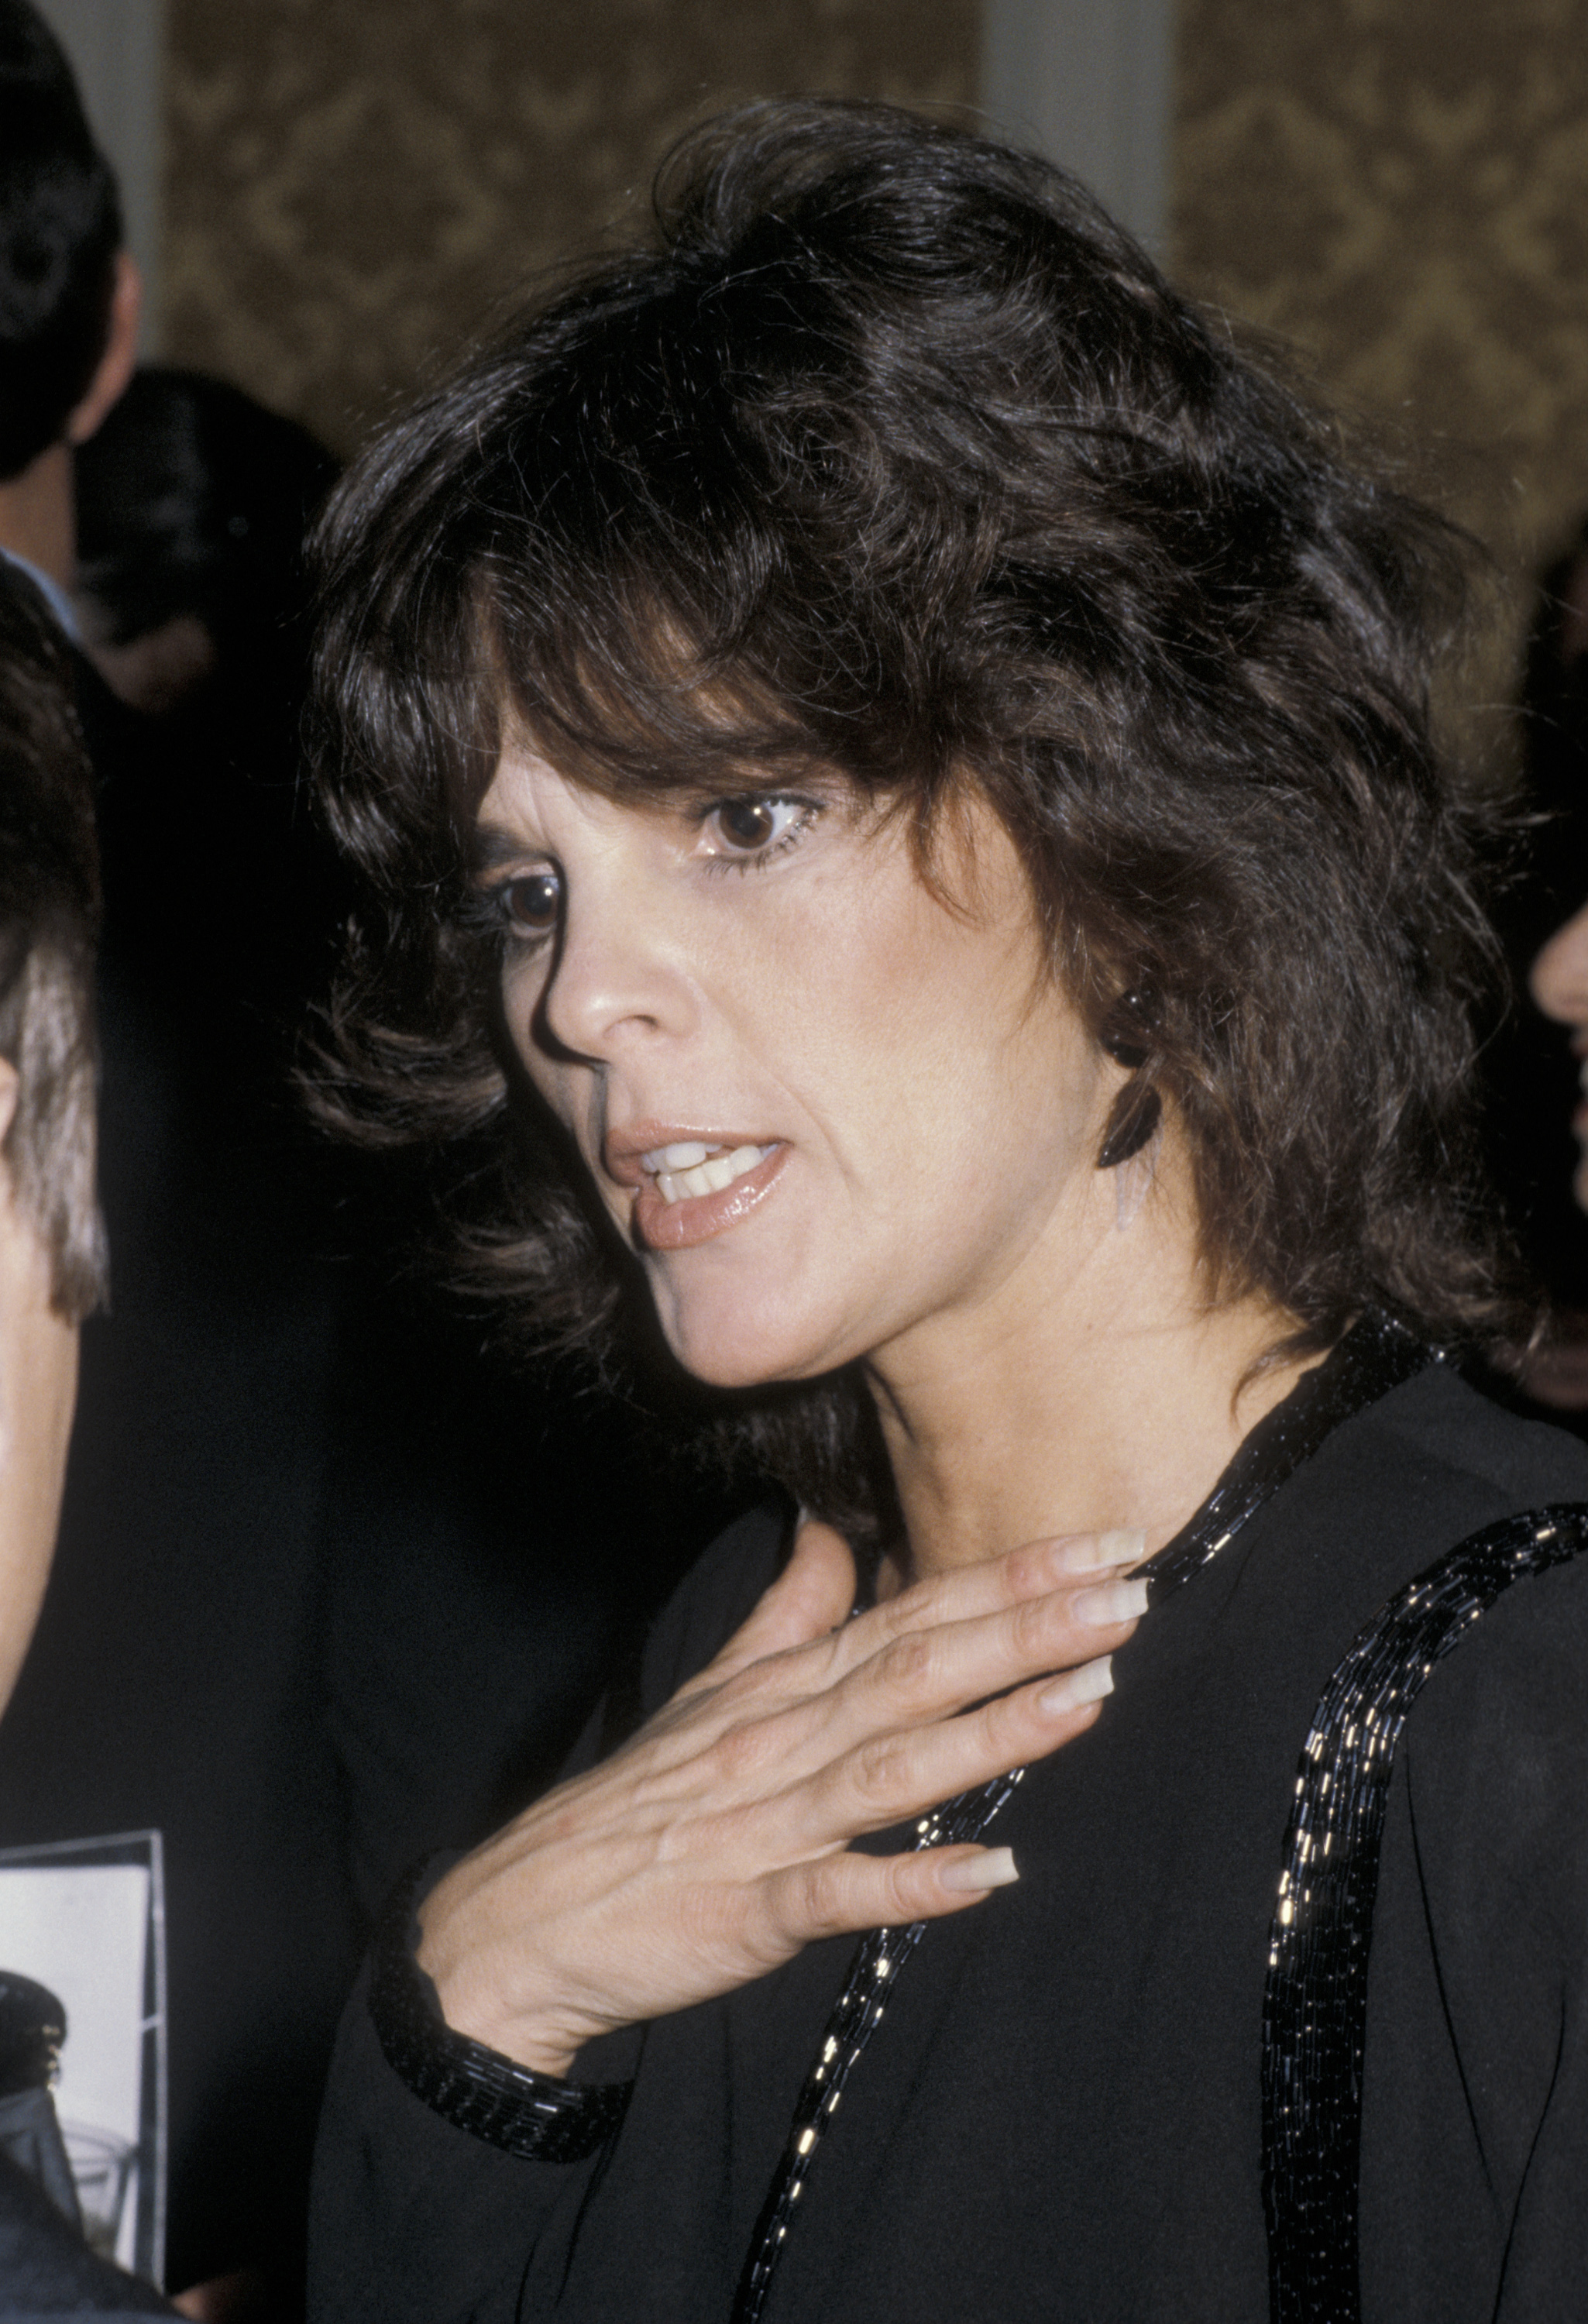 Ali MacGraw at the Ladies Home Journal Women of The Year Award in New York City, on November 28, 1979 | Source: Getty Images